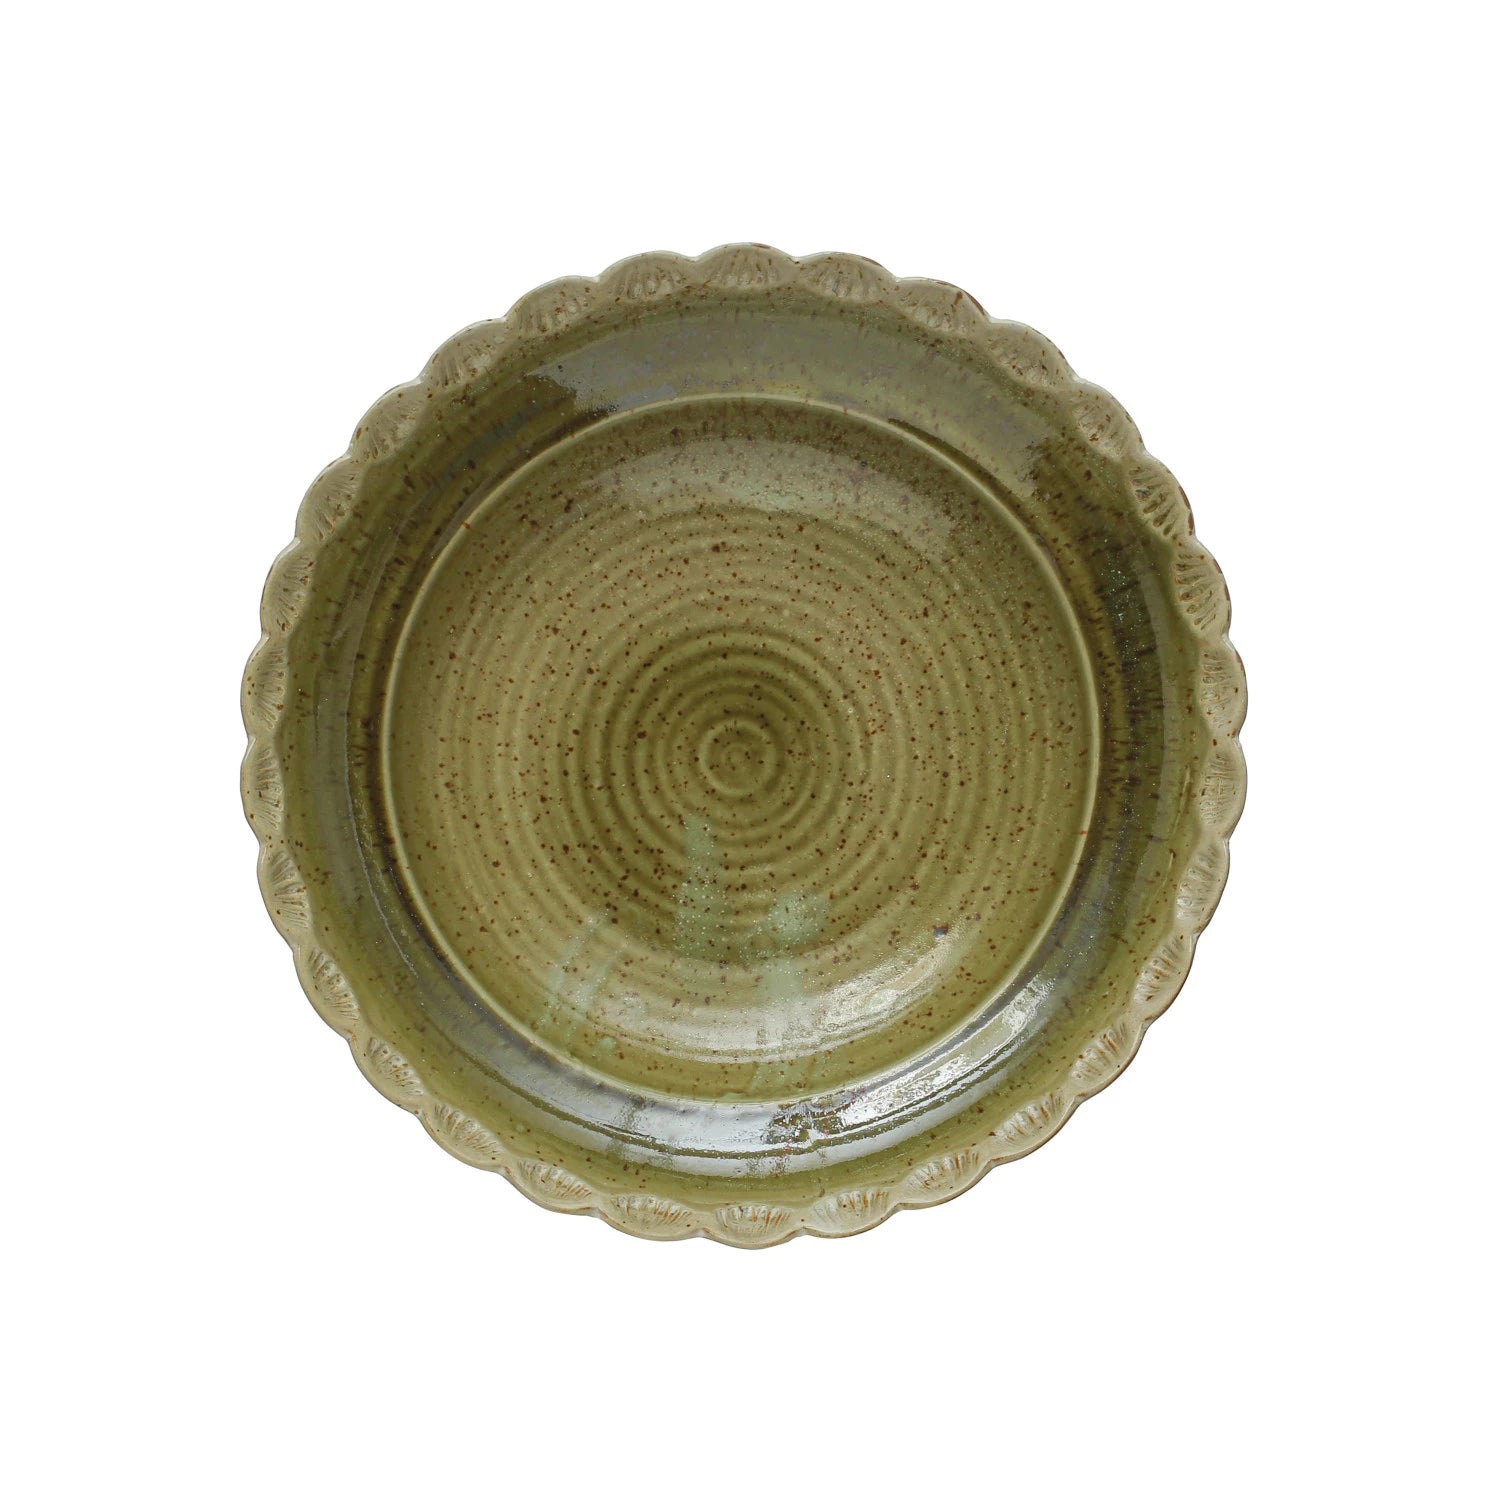 top view of scalloped bowl on a white background.